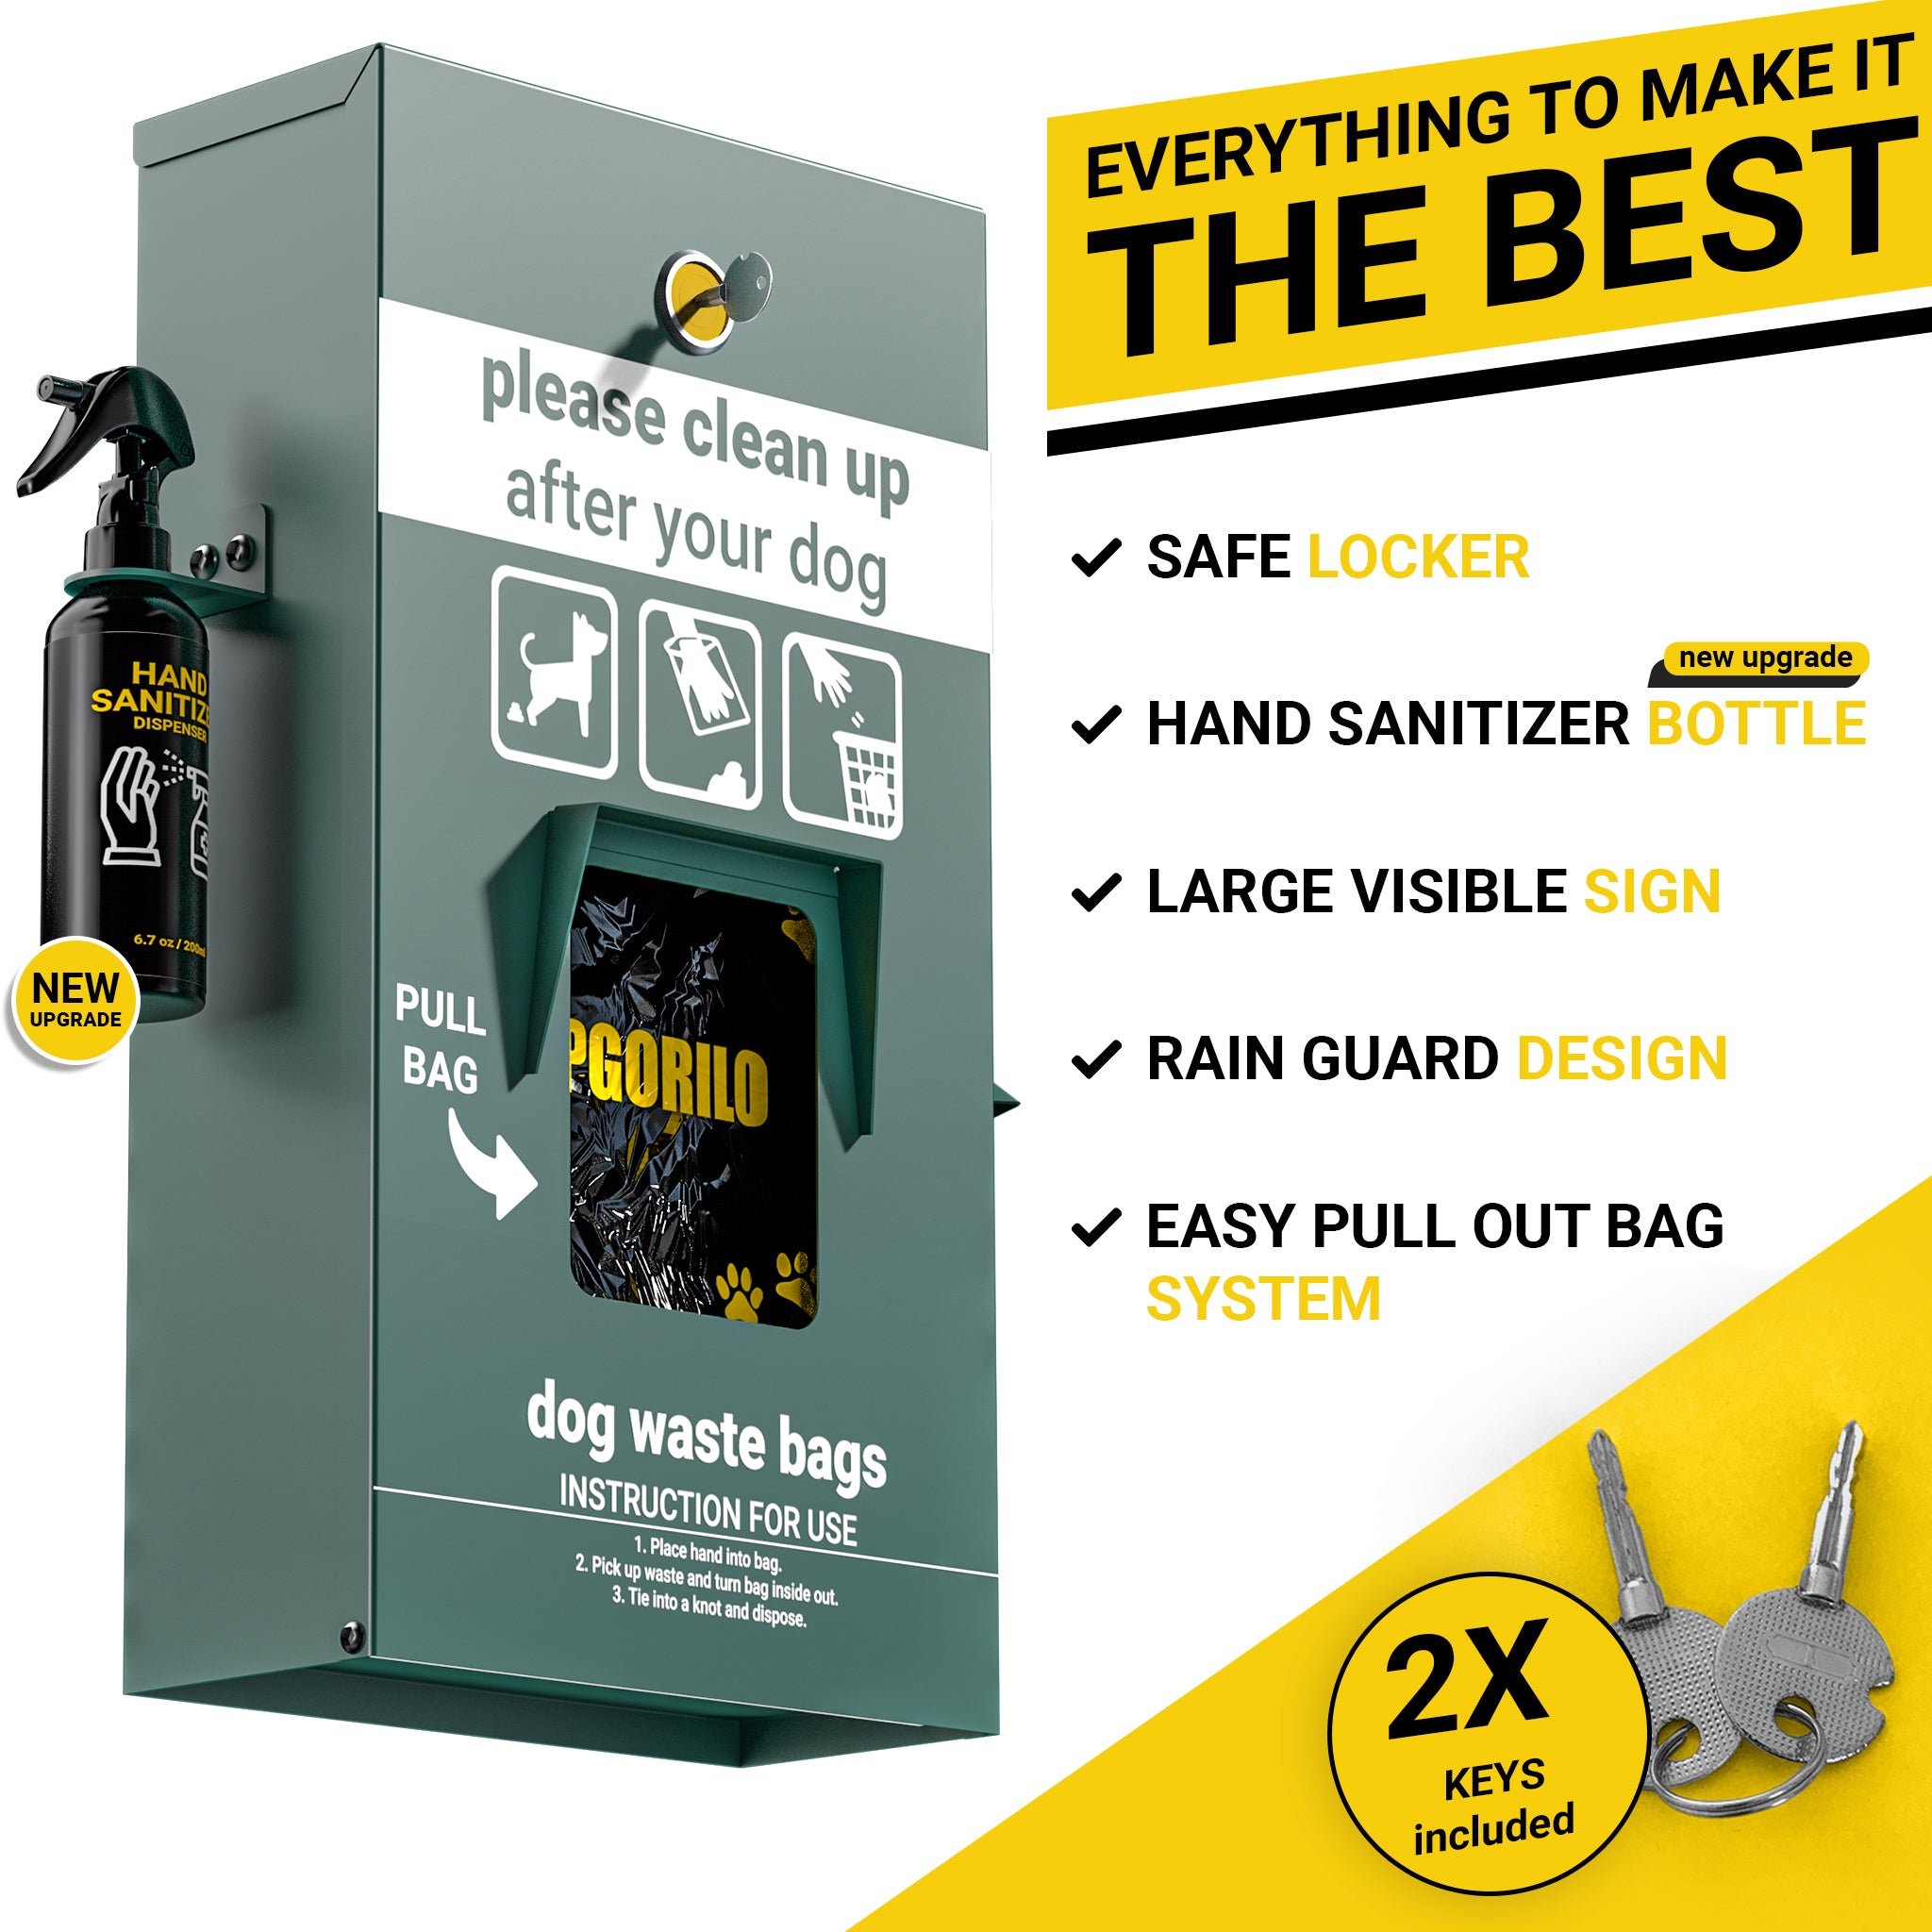 Dog Waste Station Bag Dispenser with Pull Out Bags - Original Glow in The Dark Dog Poop Station with Hand Sanitizer Bottle